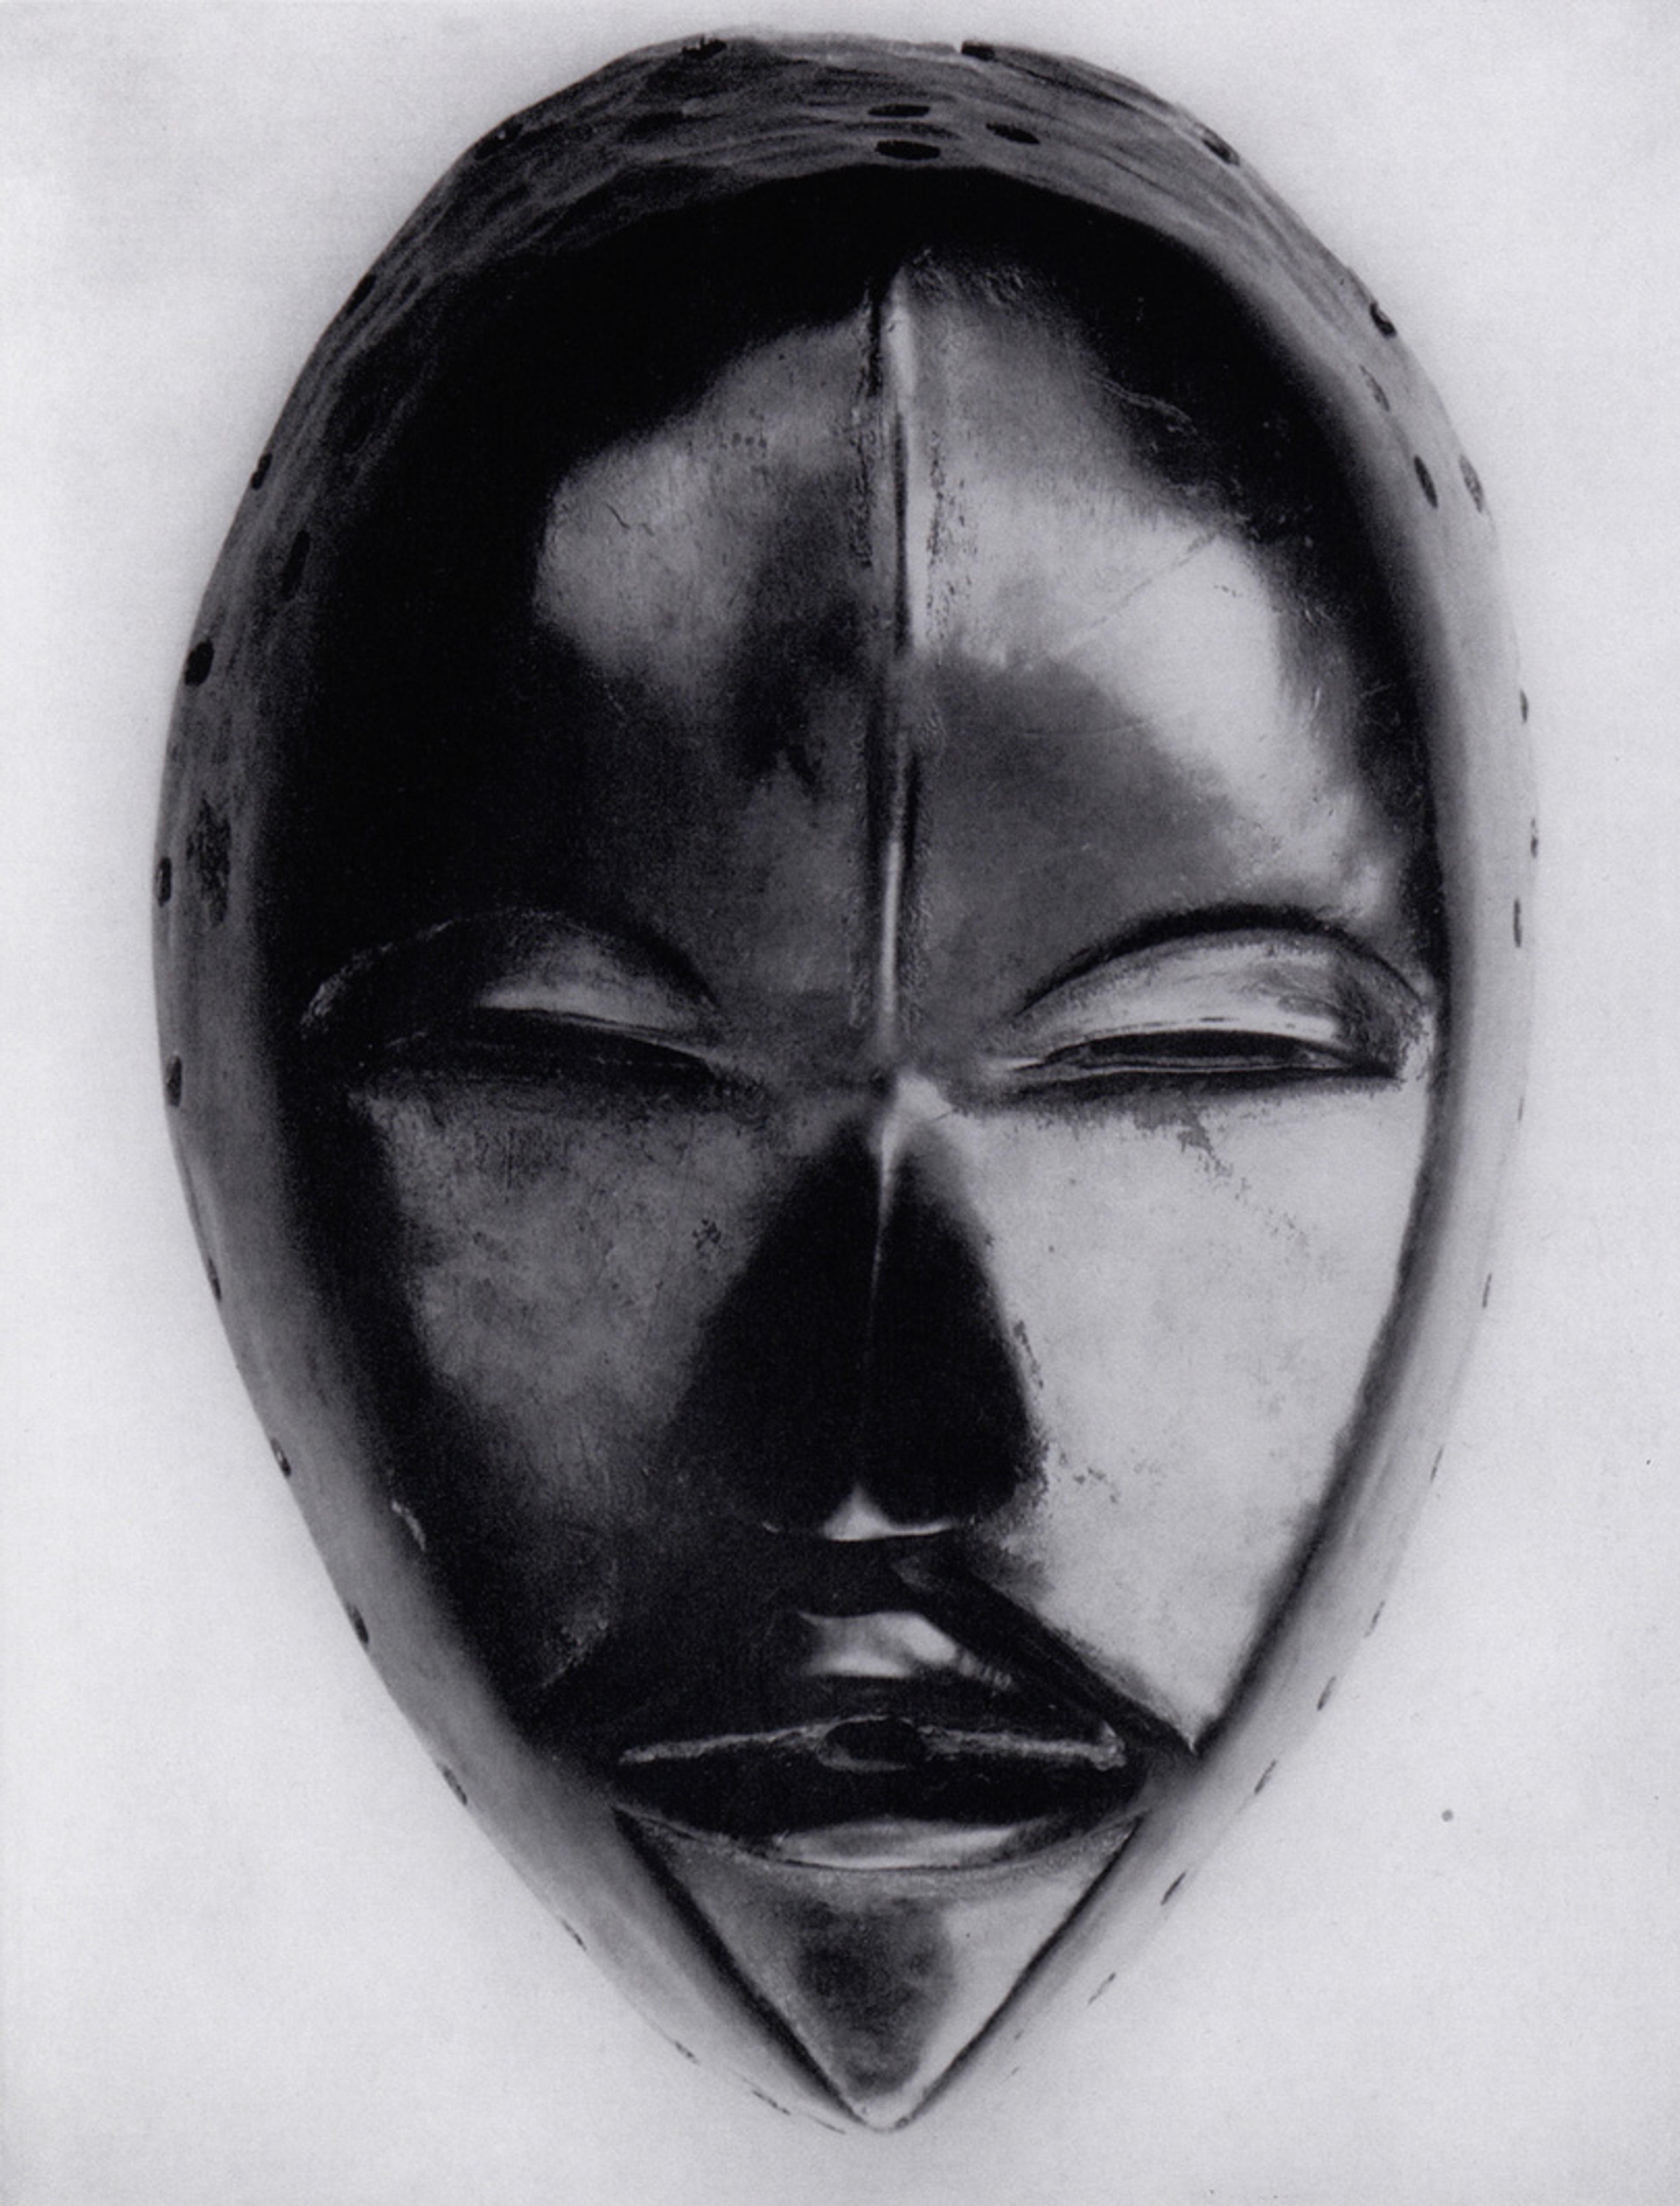 Sherrie Levine, African Masks After Walker Evans III, 2014, 1 of 24 giclée inkjet prints, edition 9 of 12. Courtesy of the Artist, Simon Lee Gallery and the Walker Evans Archive, Metropolitan Museum of Art, New York